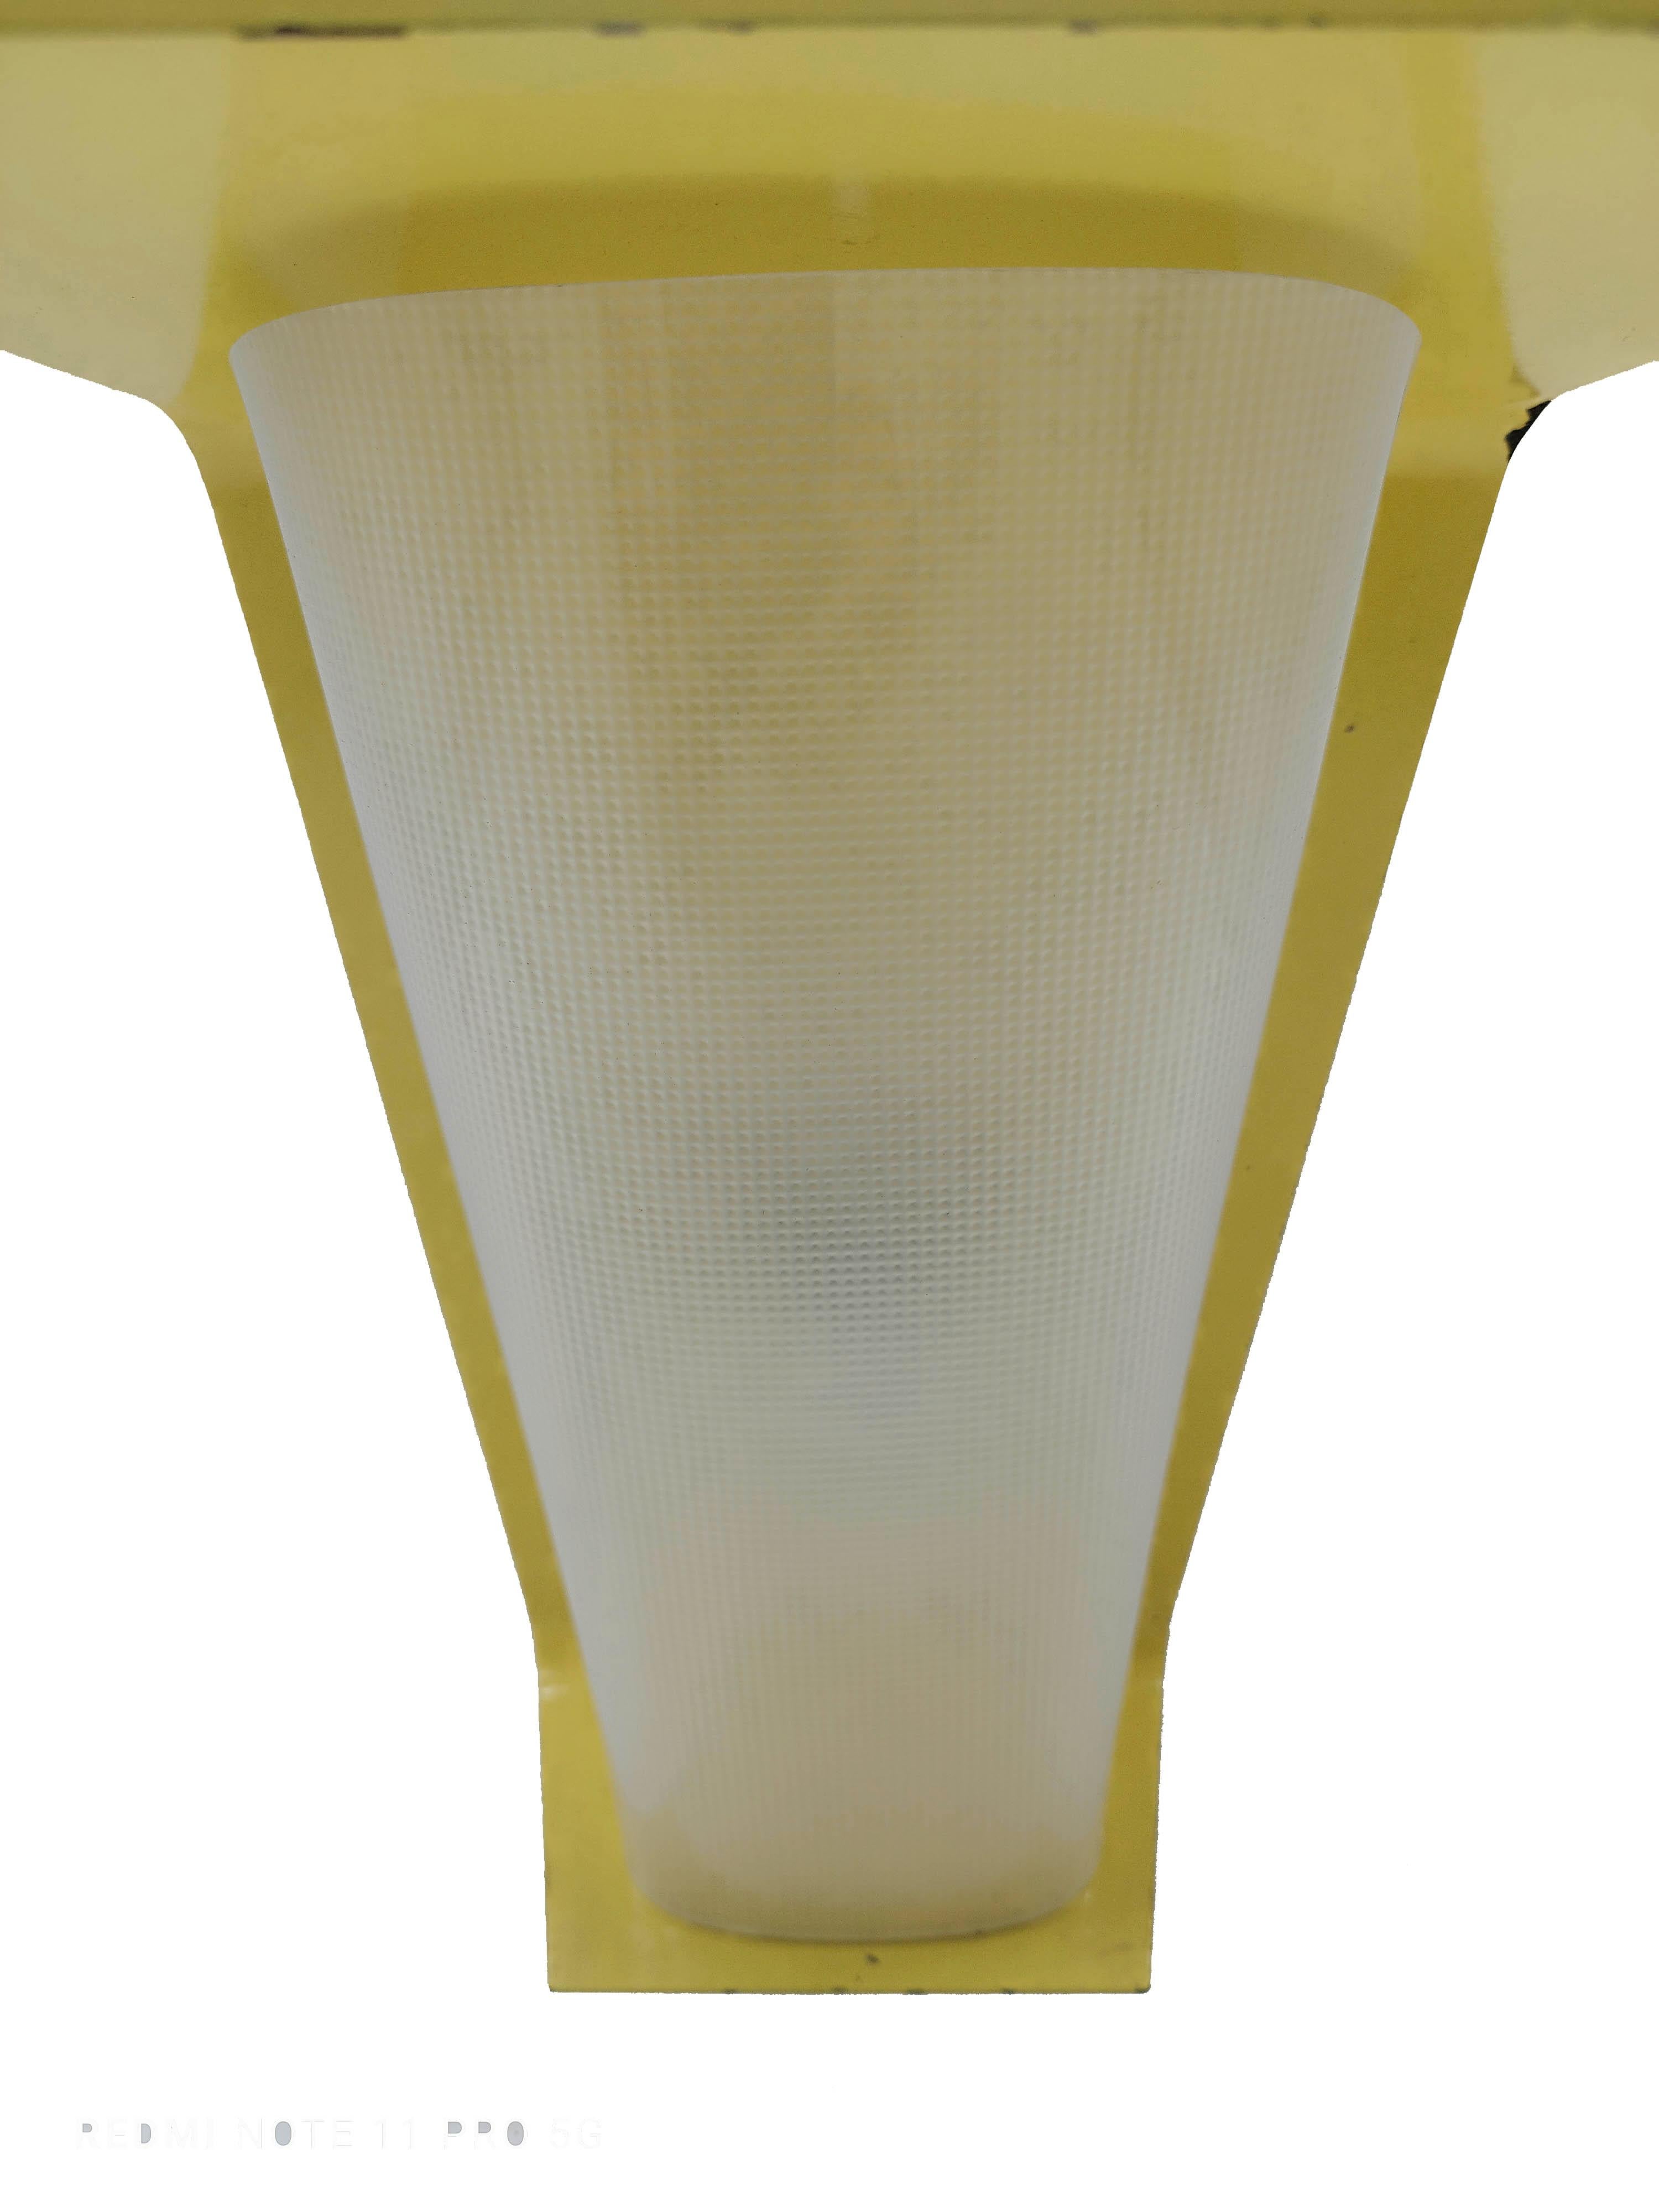 Bag Turgi Yellow Metal and Plexiglass Wall Lamp, Italy 1950s In Good Condition For Sale In Naples, IT